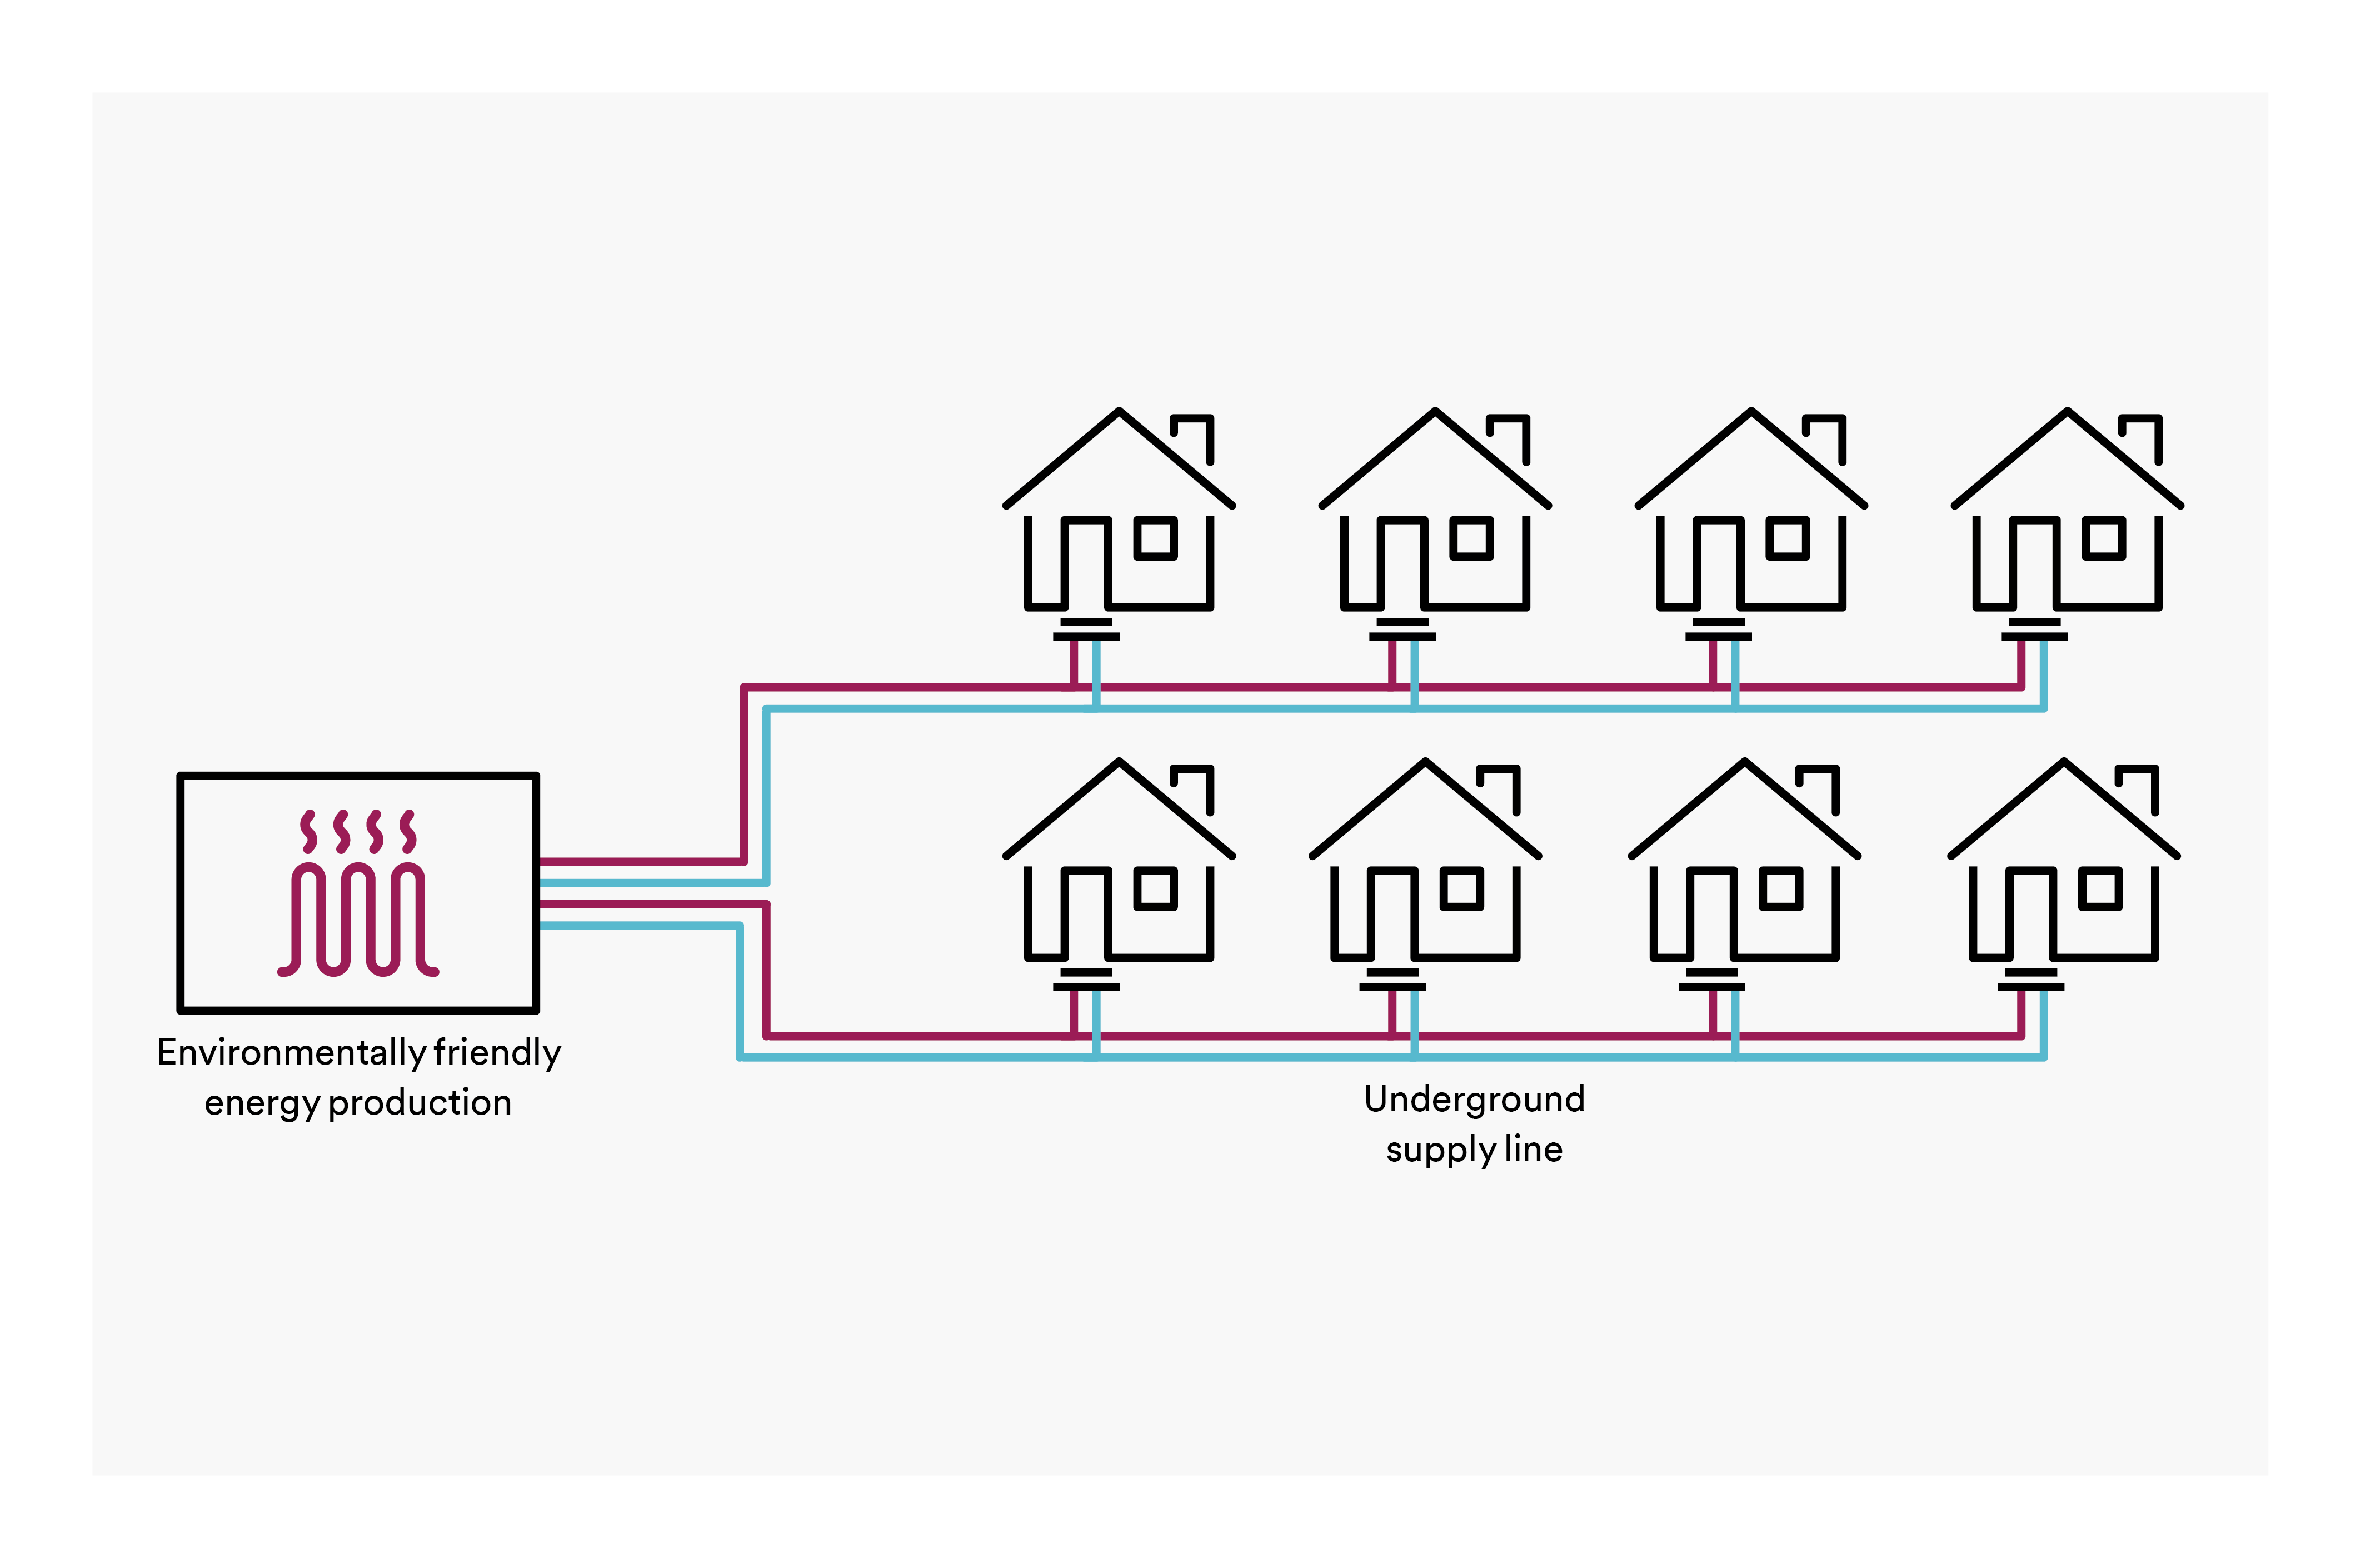 Diagram of a heat circulation system of a heating network. It shows how hot water is fed through underground supply pipes to the connected houses and returned to the heating centre as cold water. 